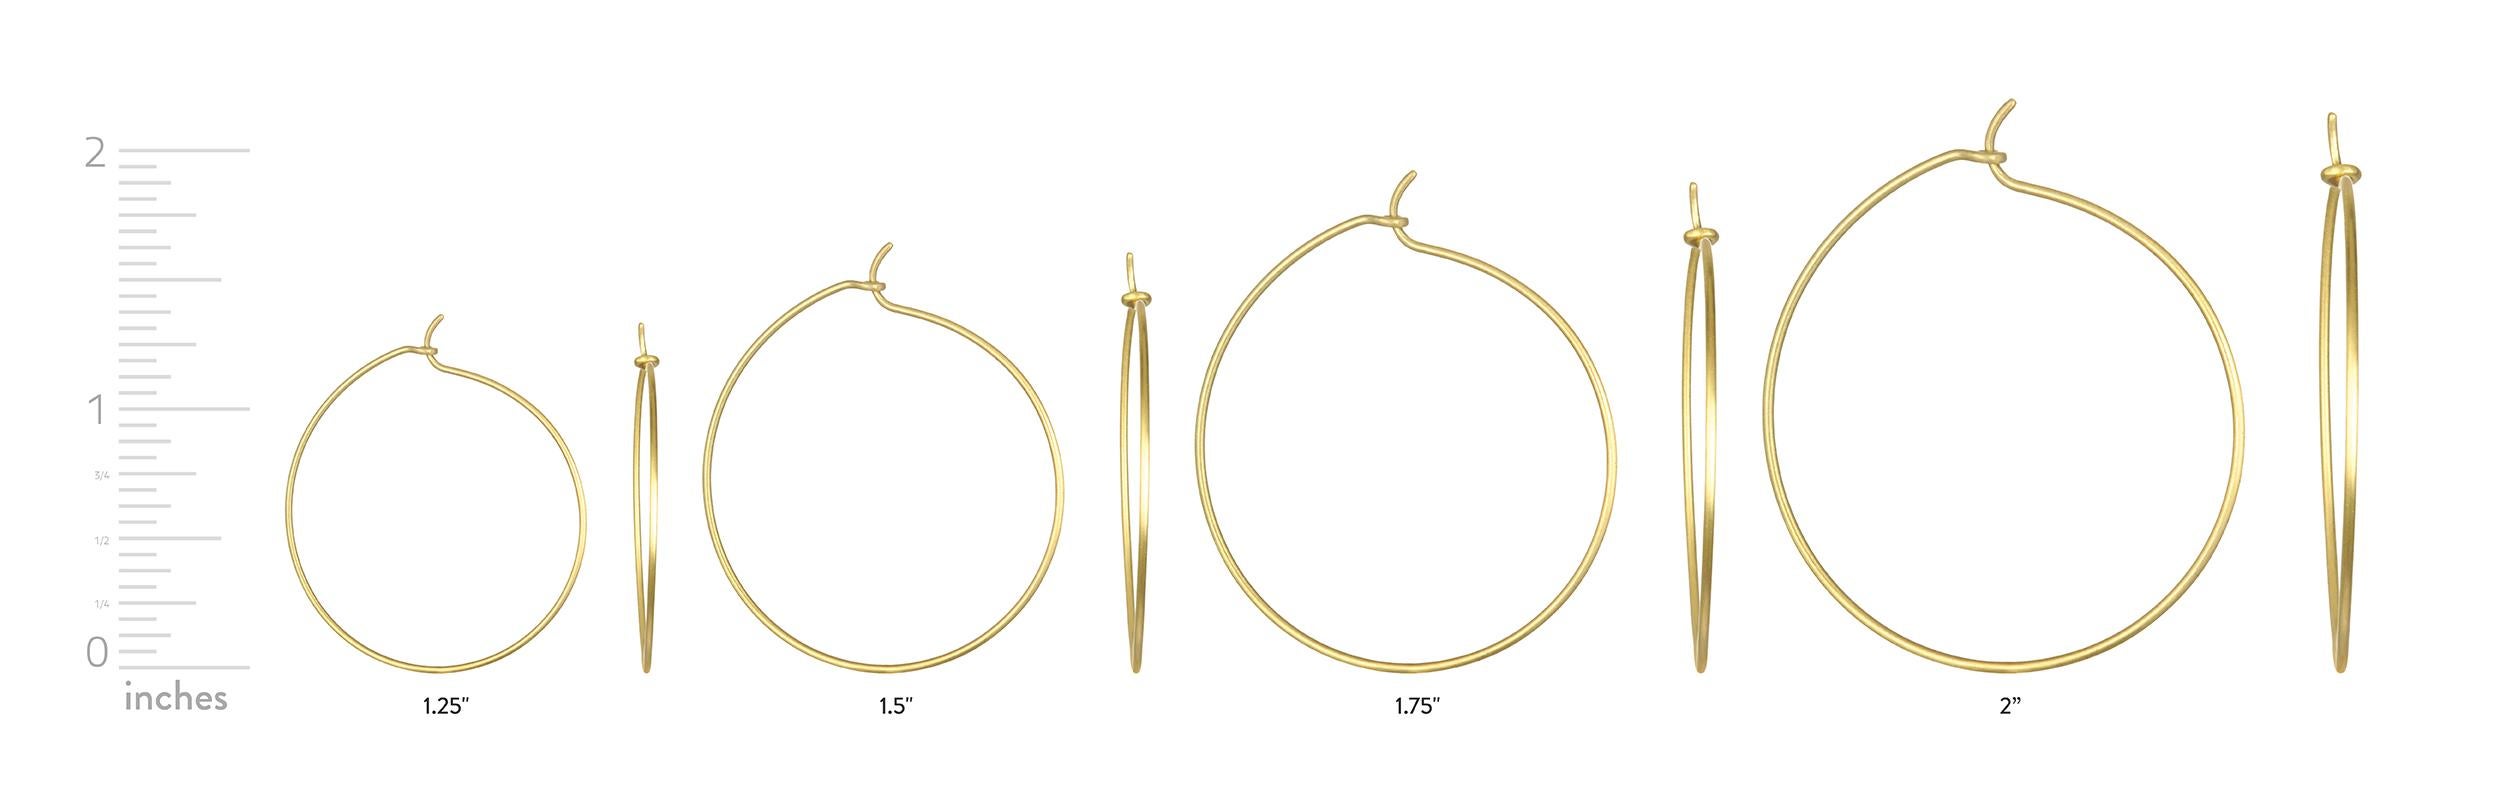 Faye Kim's 18 Karat Gold handmade wire hoops are a must-have for every jewelry wardrobe. Casual, chic and wearable every day, the hoops give endless opportunities to change your look with different drops, sold separately.

Hoops: 1.25